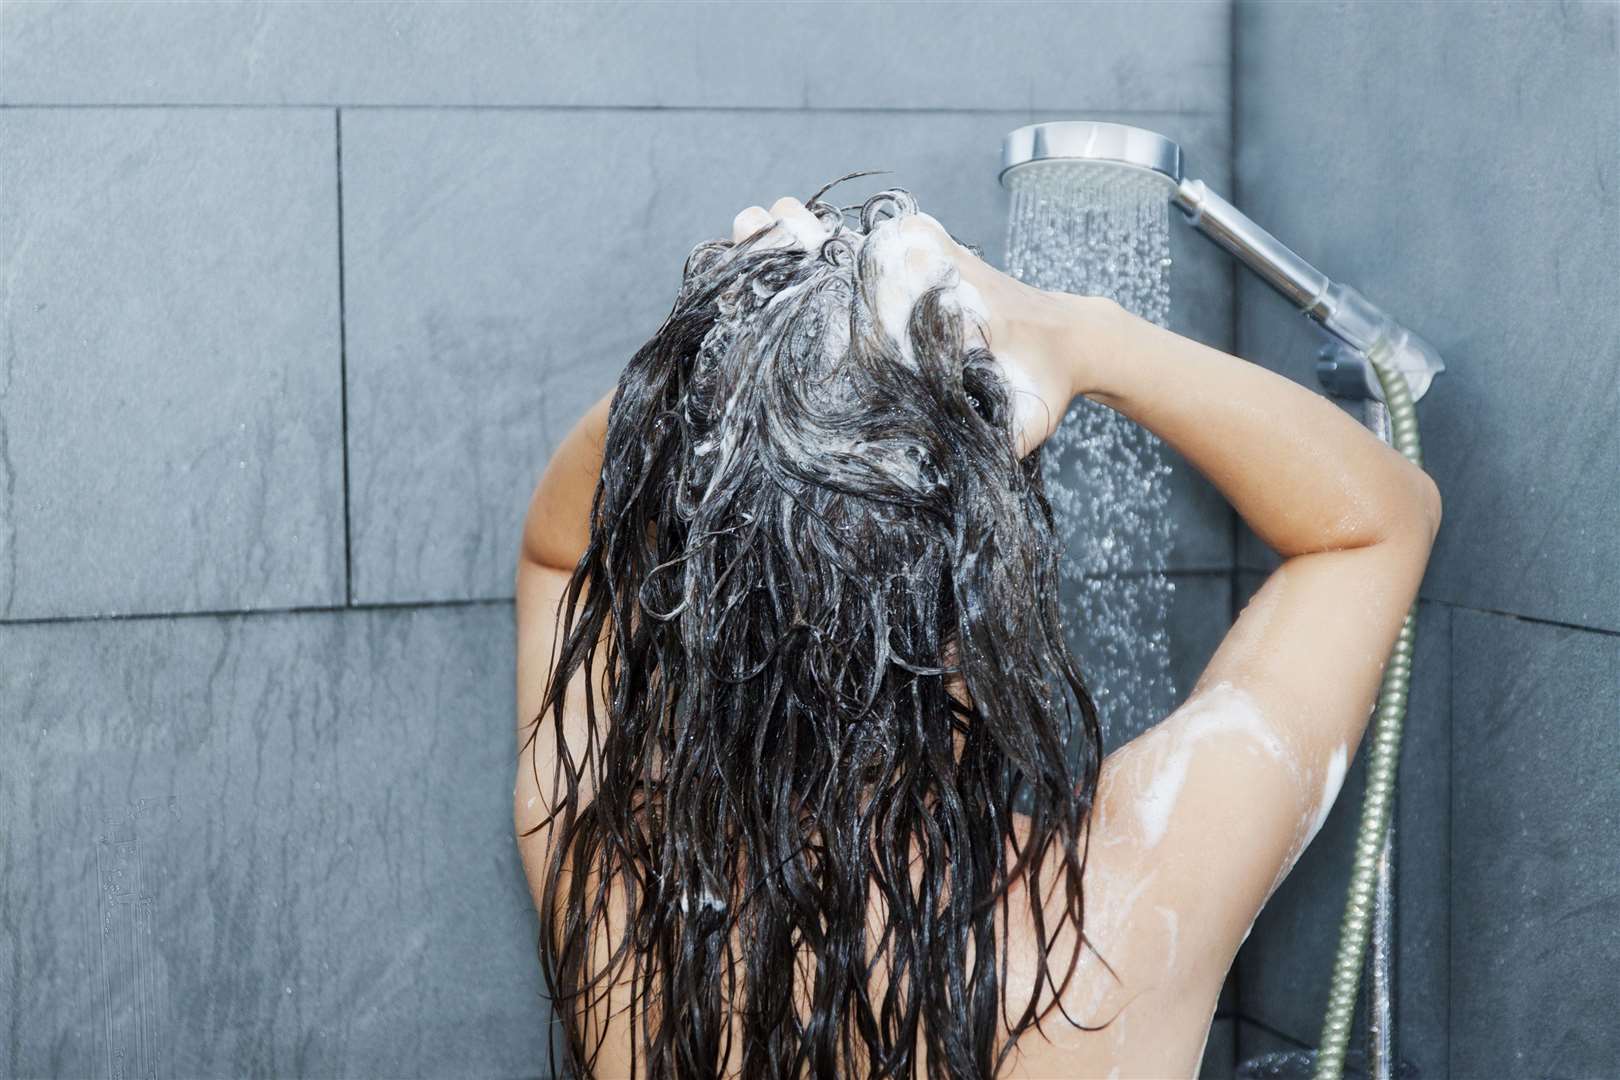 Can you get through the shower in under four minutes: Photo: iStock.